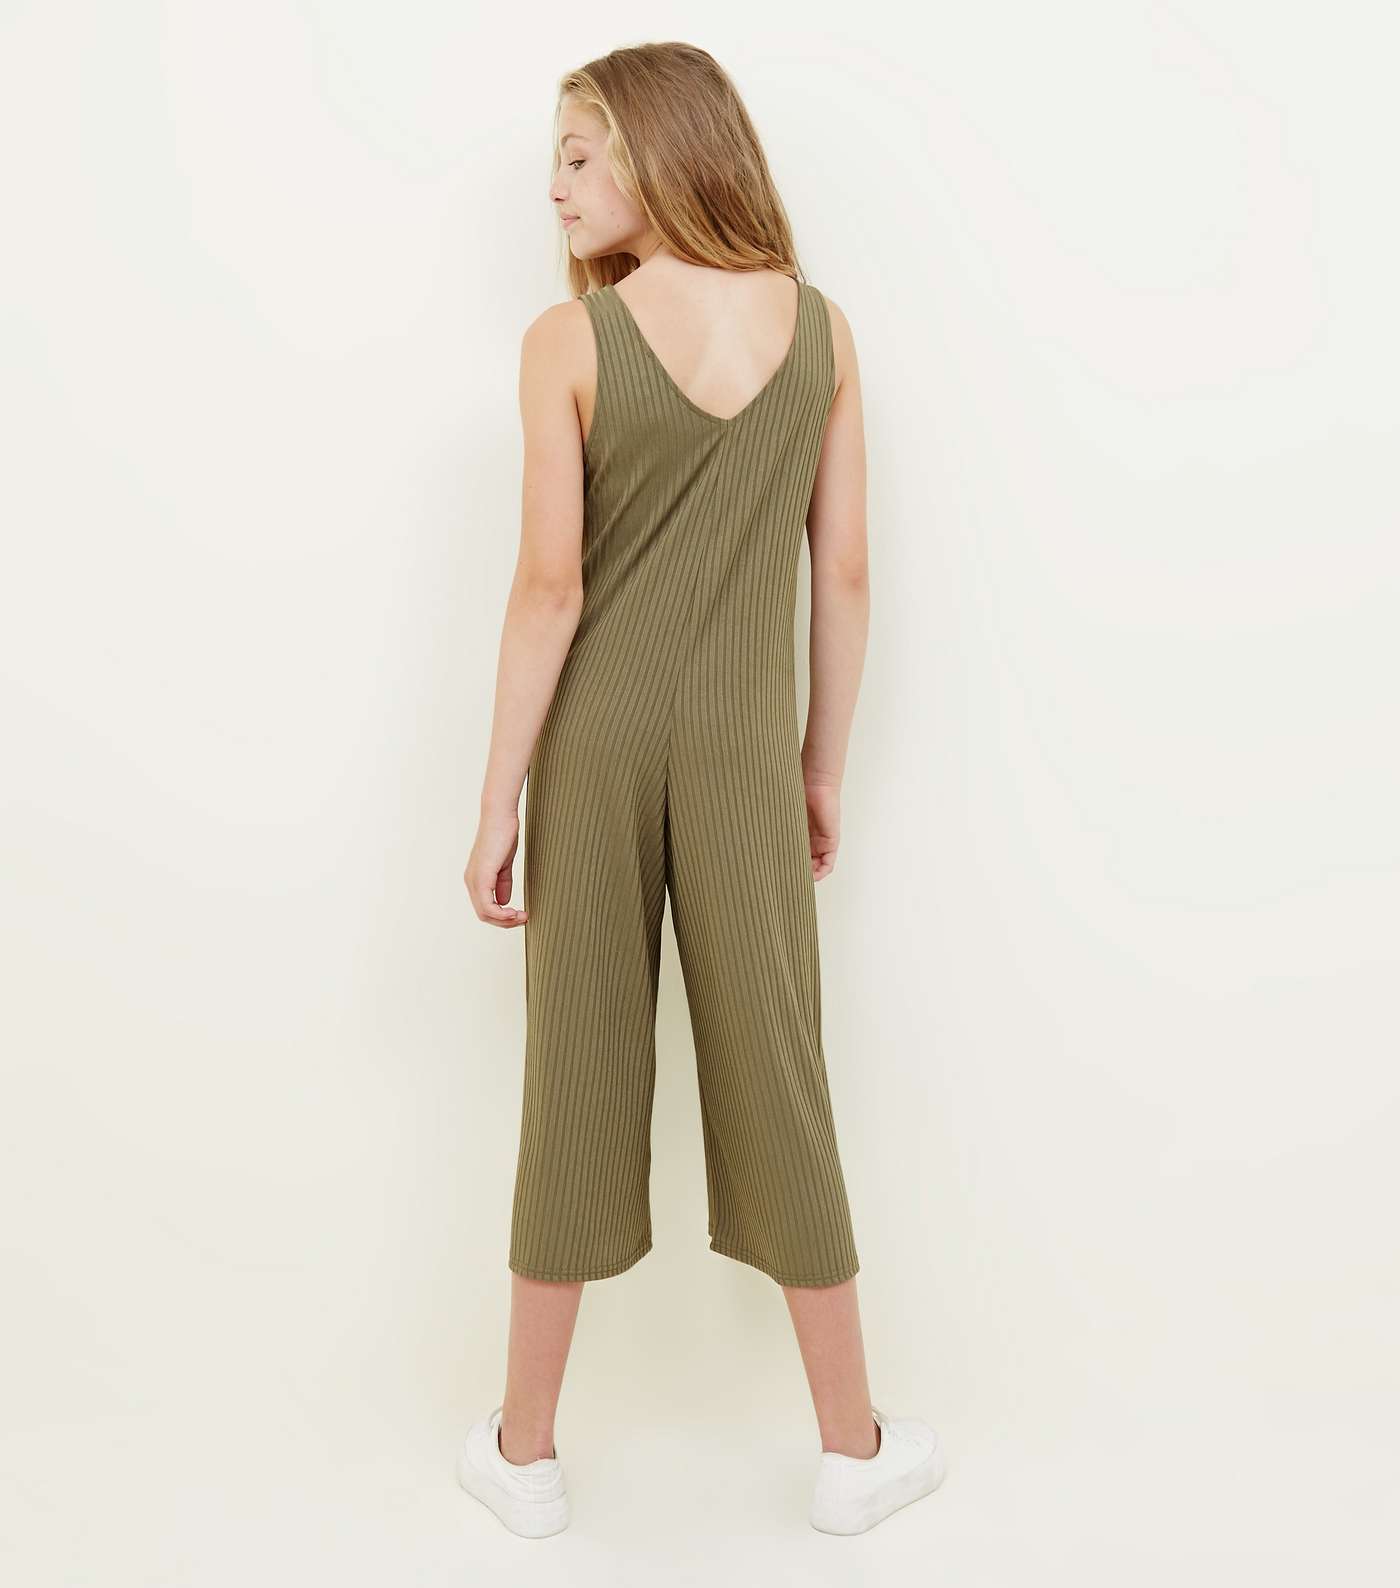 Girls Khaki Button Front Ribbed Jumpsuit Image 2